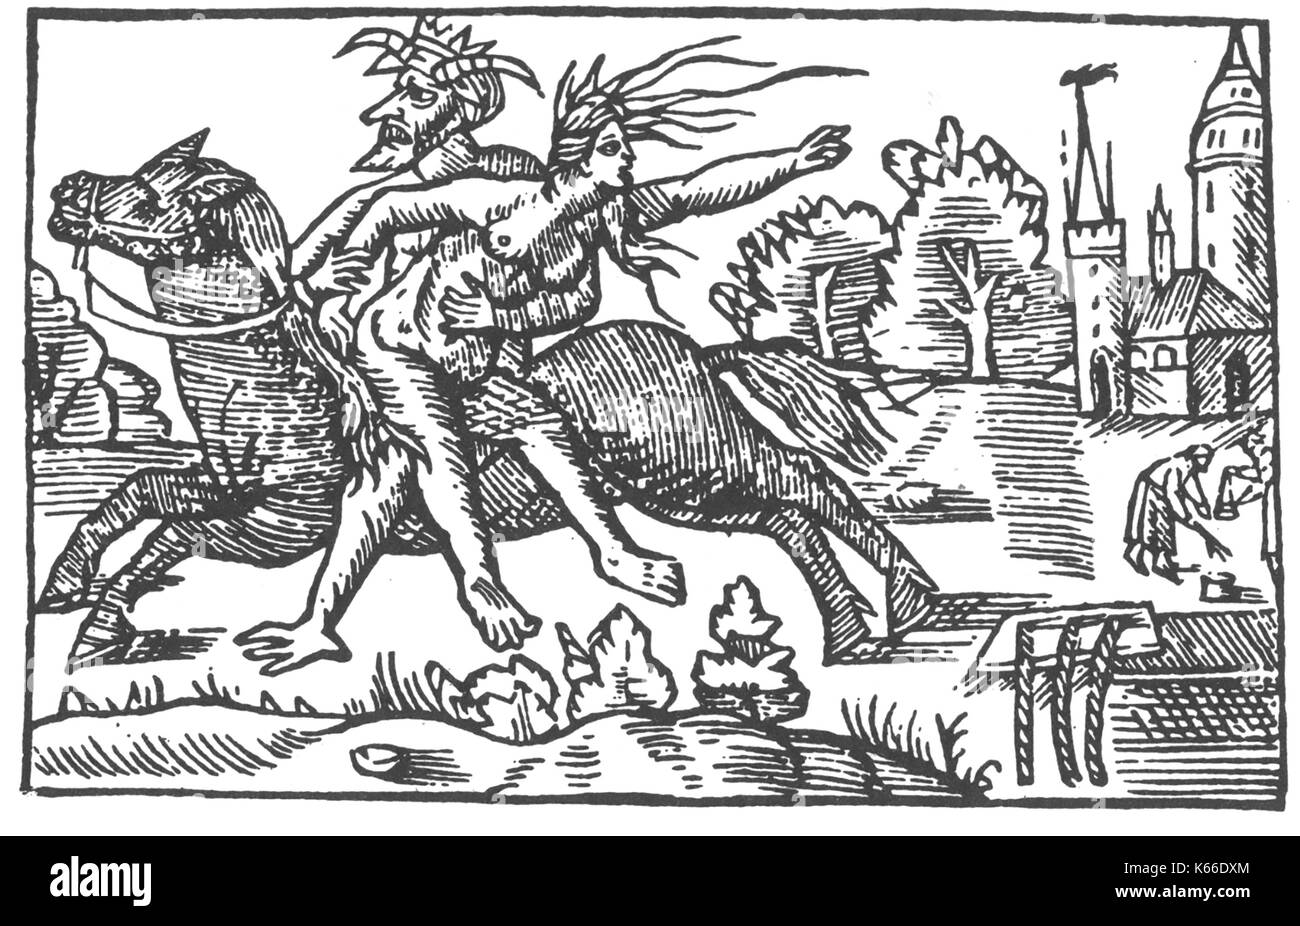 OLAUS MAGNUS (1490-1557) Swedish Catholic writer. Woodcut from his 1555 book Historia de Gentibus Septentrionalibus (History of the Northern Peoples) showing a woman being carried off by the Devil Stock Photo